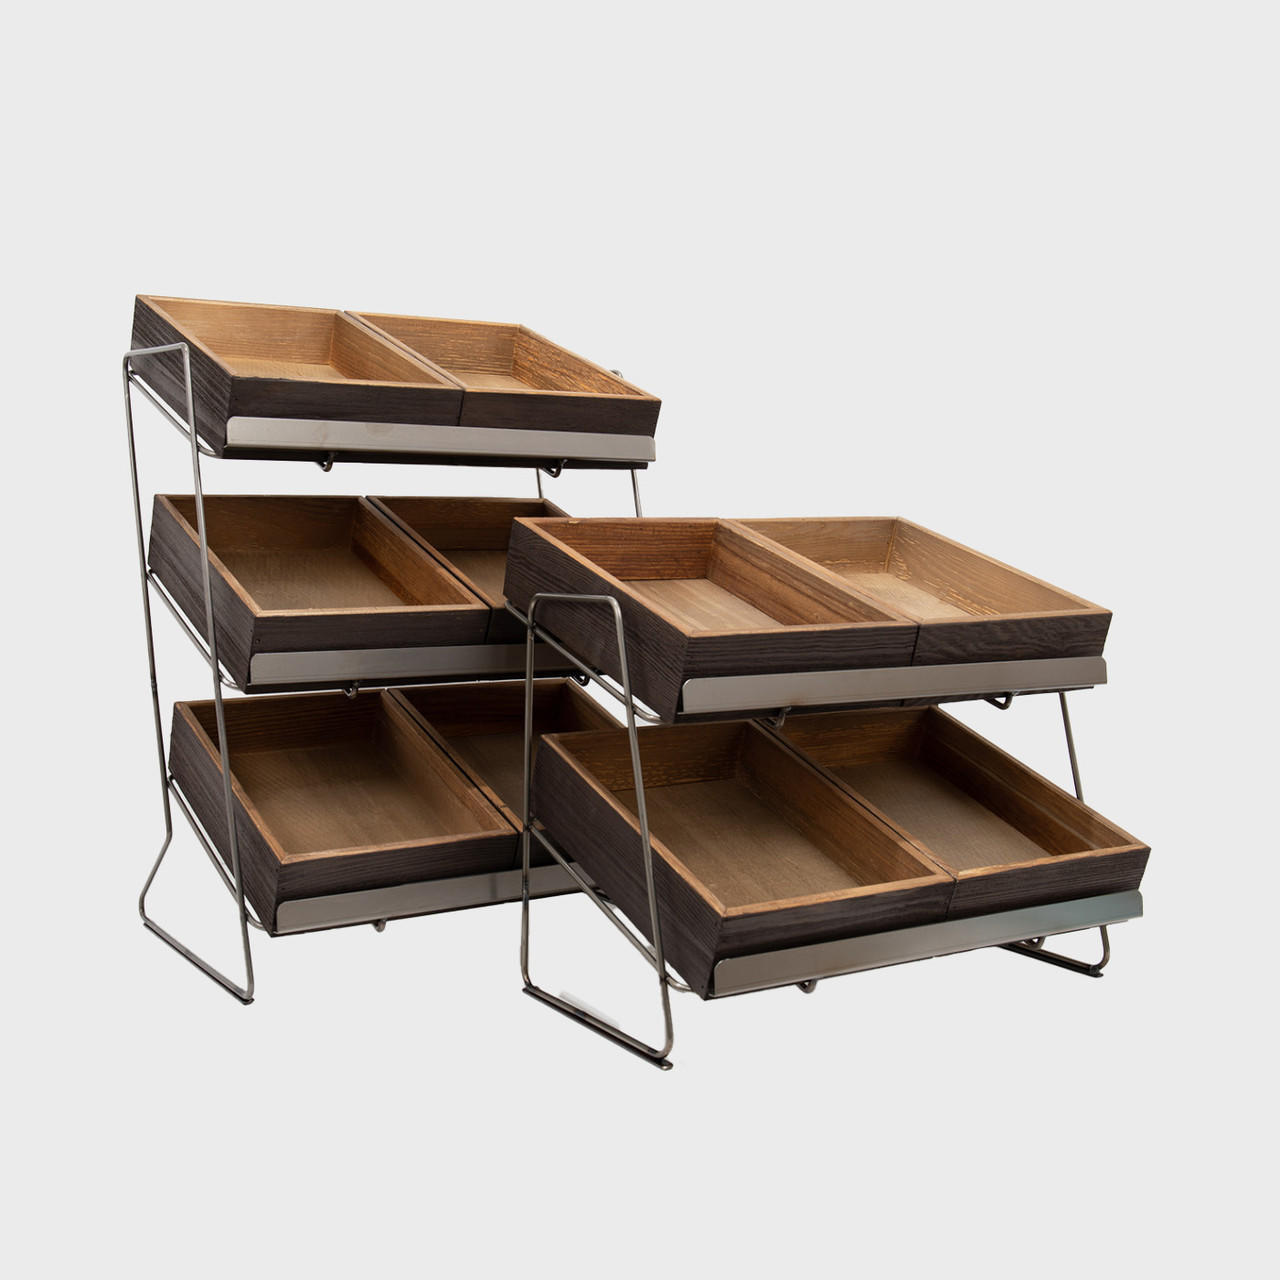 Railton Tiered Display Units with Small Wooden Trays  (pk 1)  RDKTSRIS